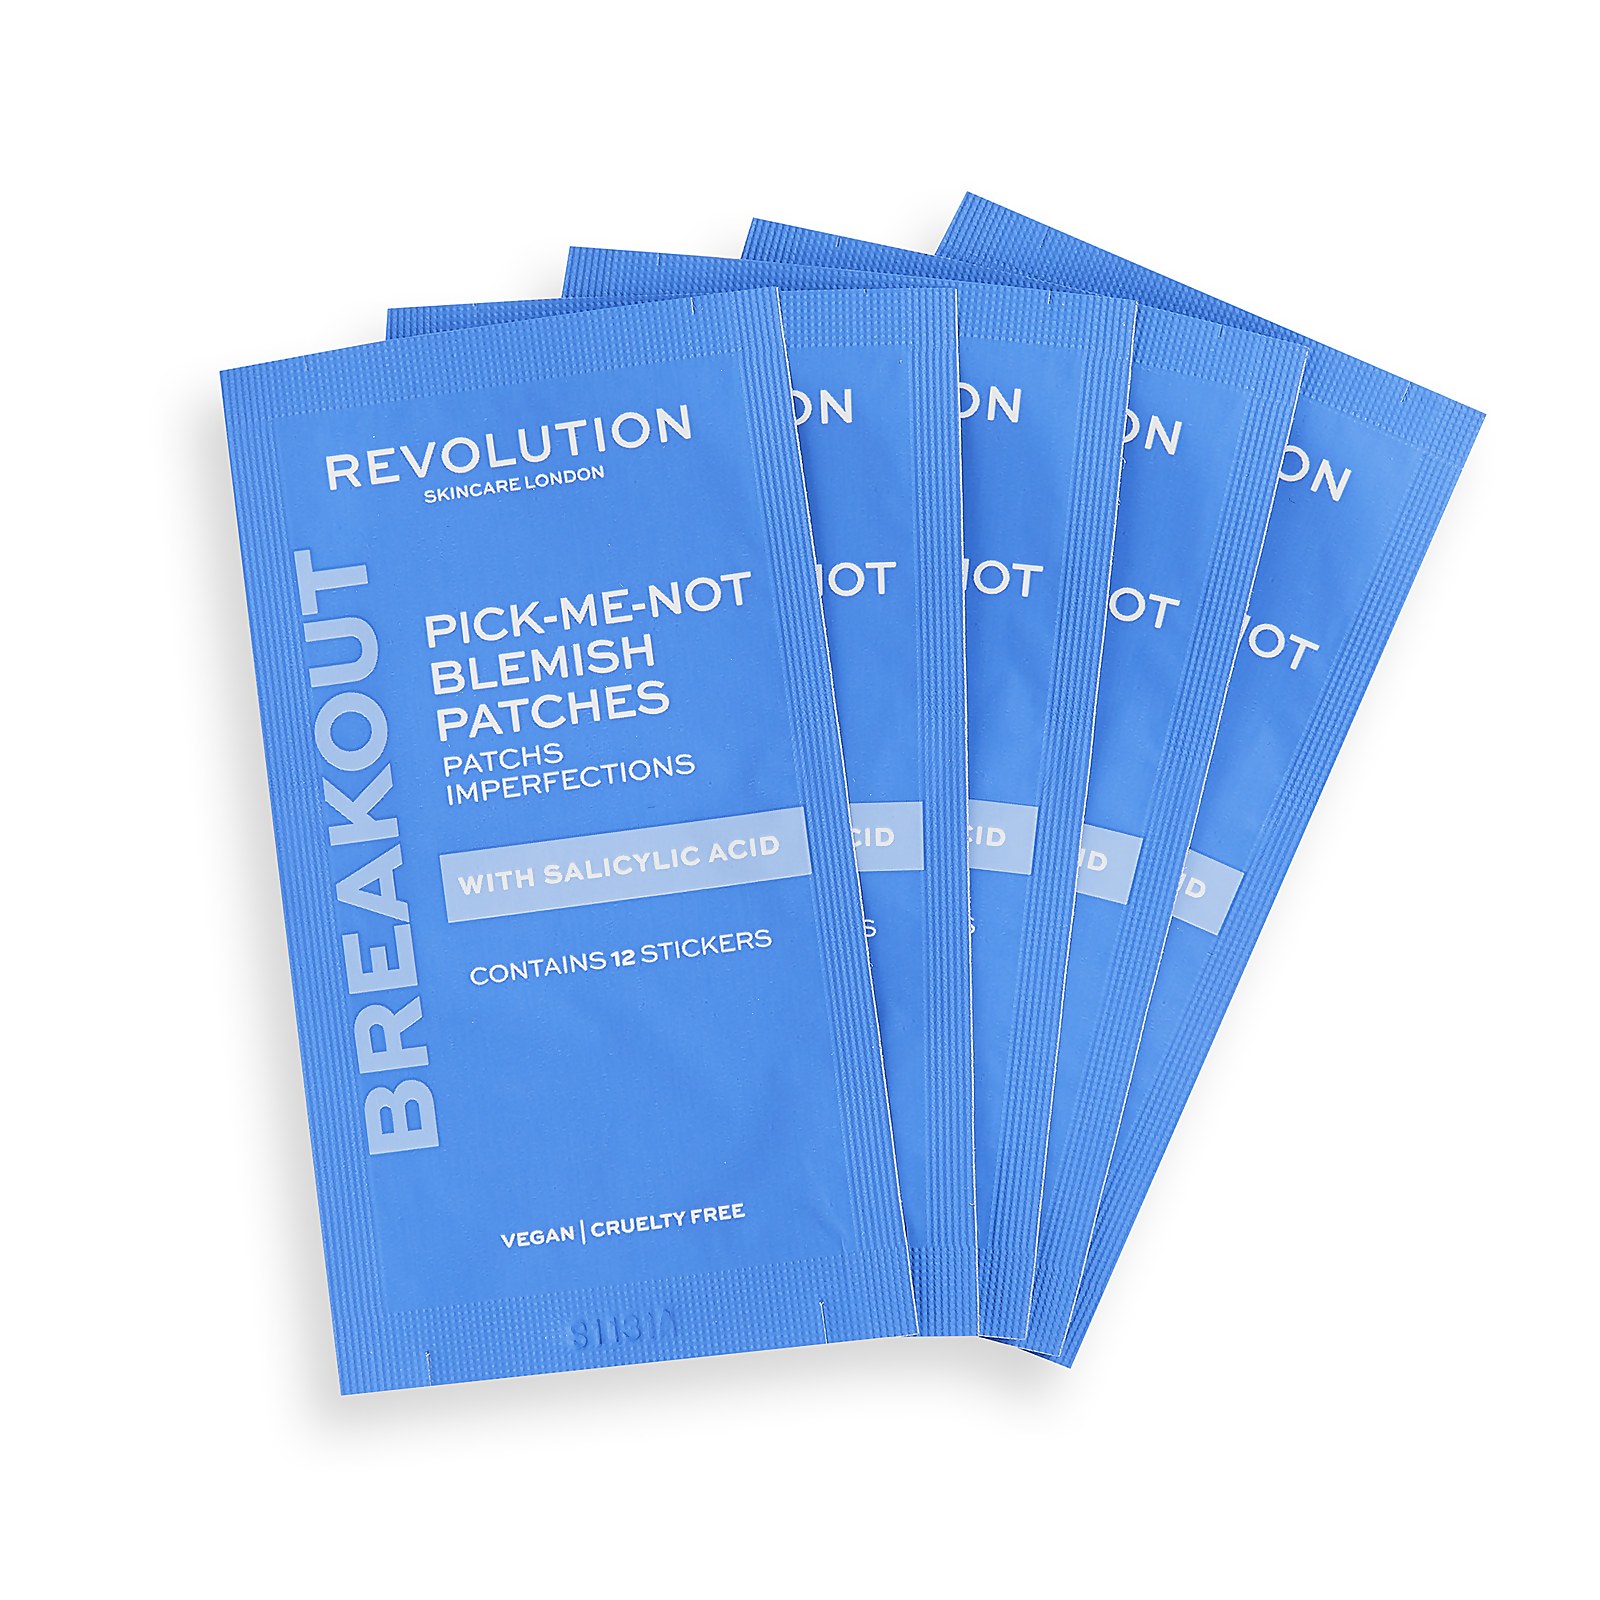 Image of Revolution Skincare Pick-me-not Blemish Patches (60 Patches)